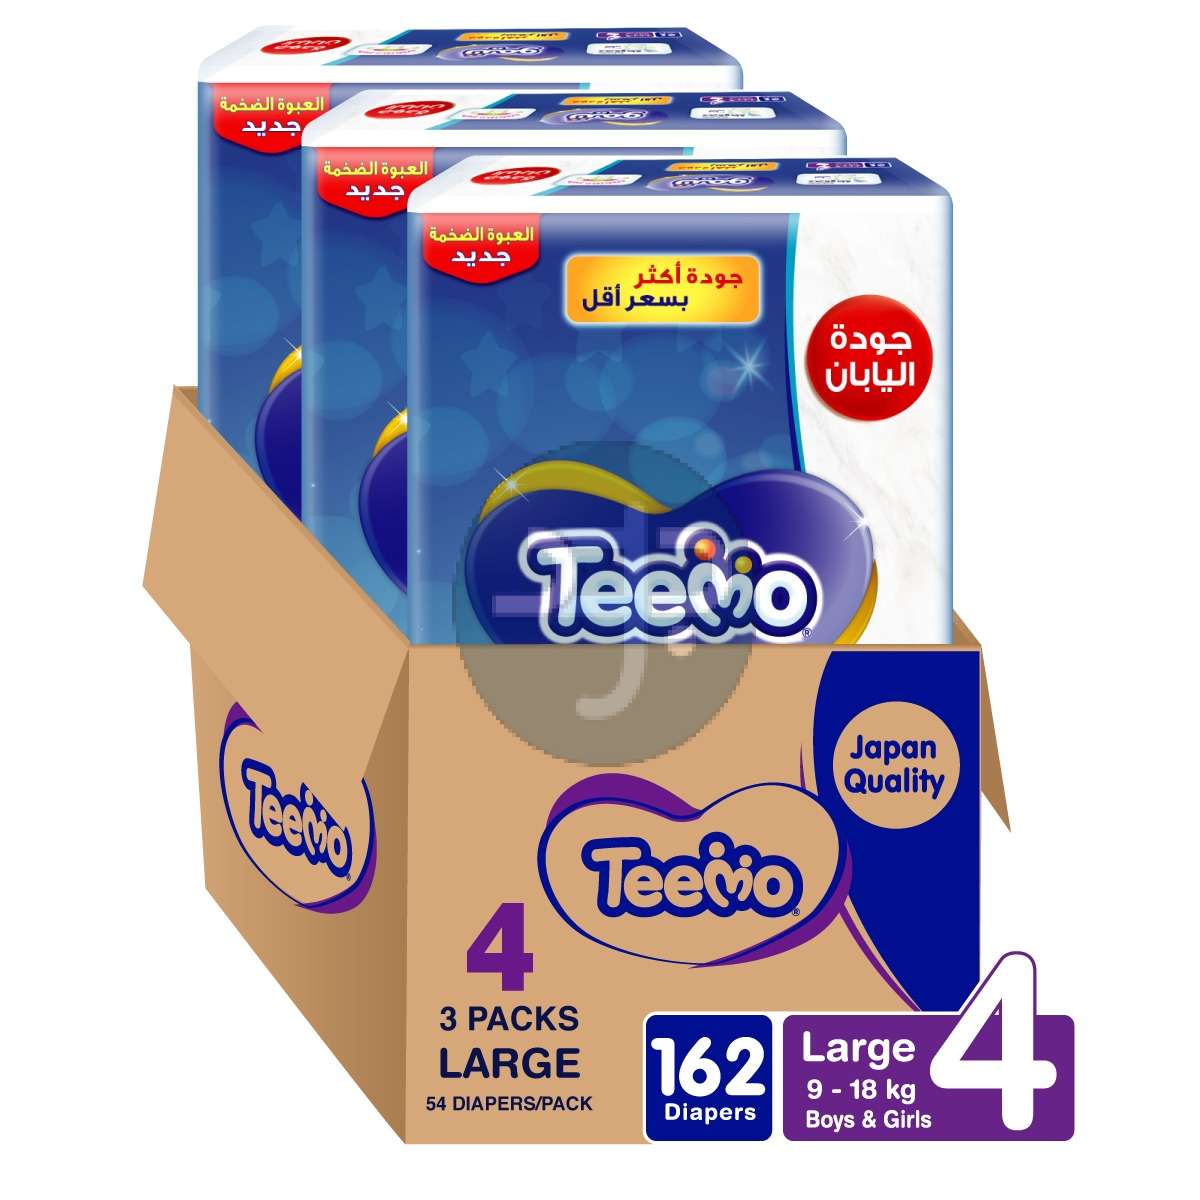 Product-Teemo Compressed Diamond Pad, Size 4, Large, 9-18 kg, Mega Box, 162 Diapers